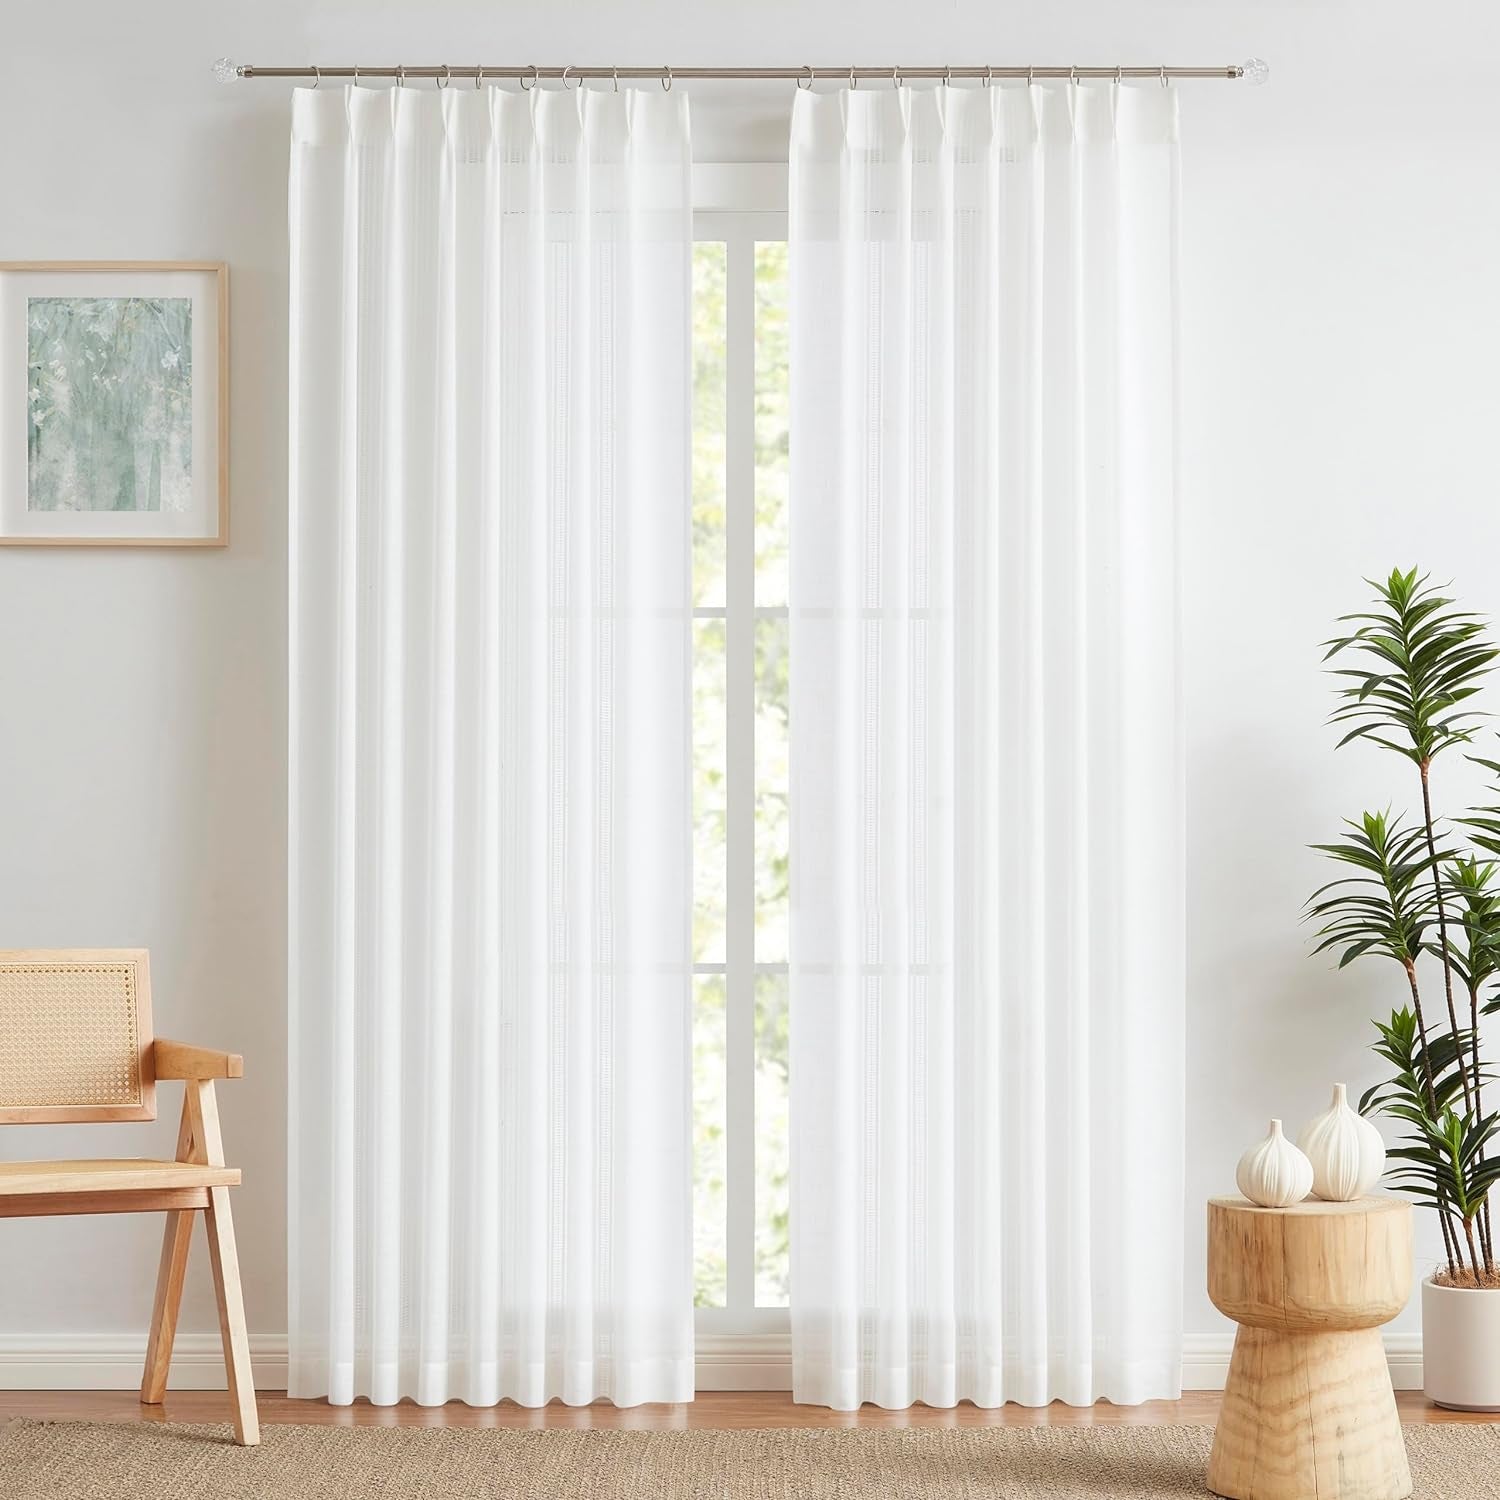 Kayne Studio Boho 2 Pages Sheer Pinch Pleated Curtains,Linen Blended 95 Inches Long Window Treatments,Light Filtering Pinch Pleat Drapes for Farmhouse Living Room 36" W X 90" L,18 Hooks,Beige  Kayne Studio White 36"X84"X2 